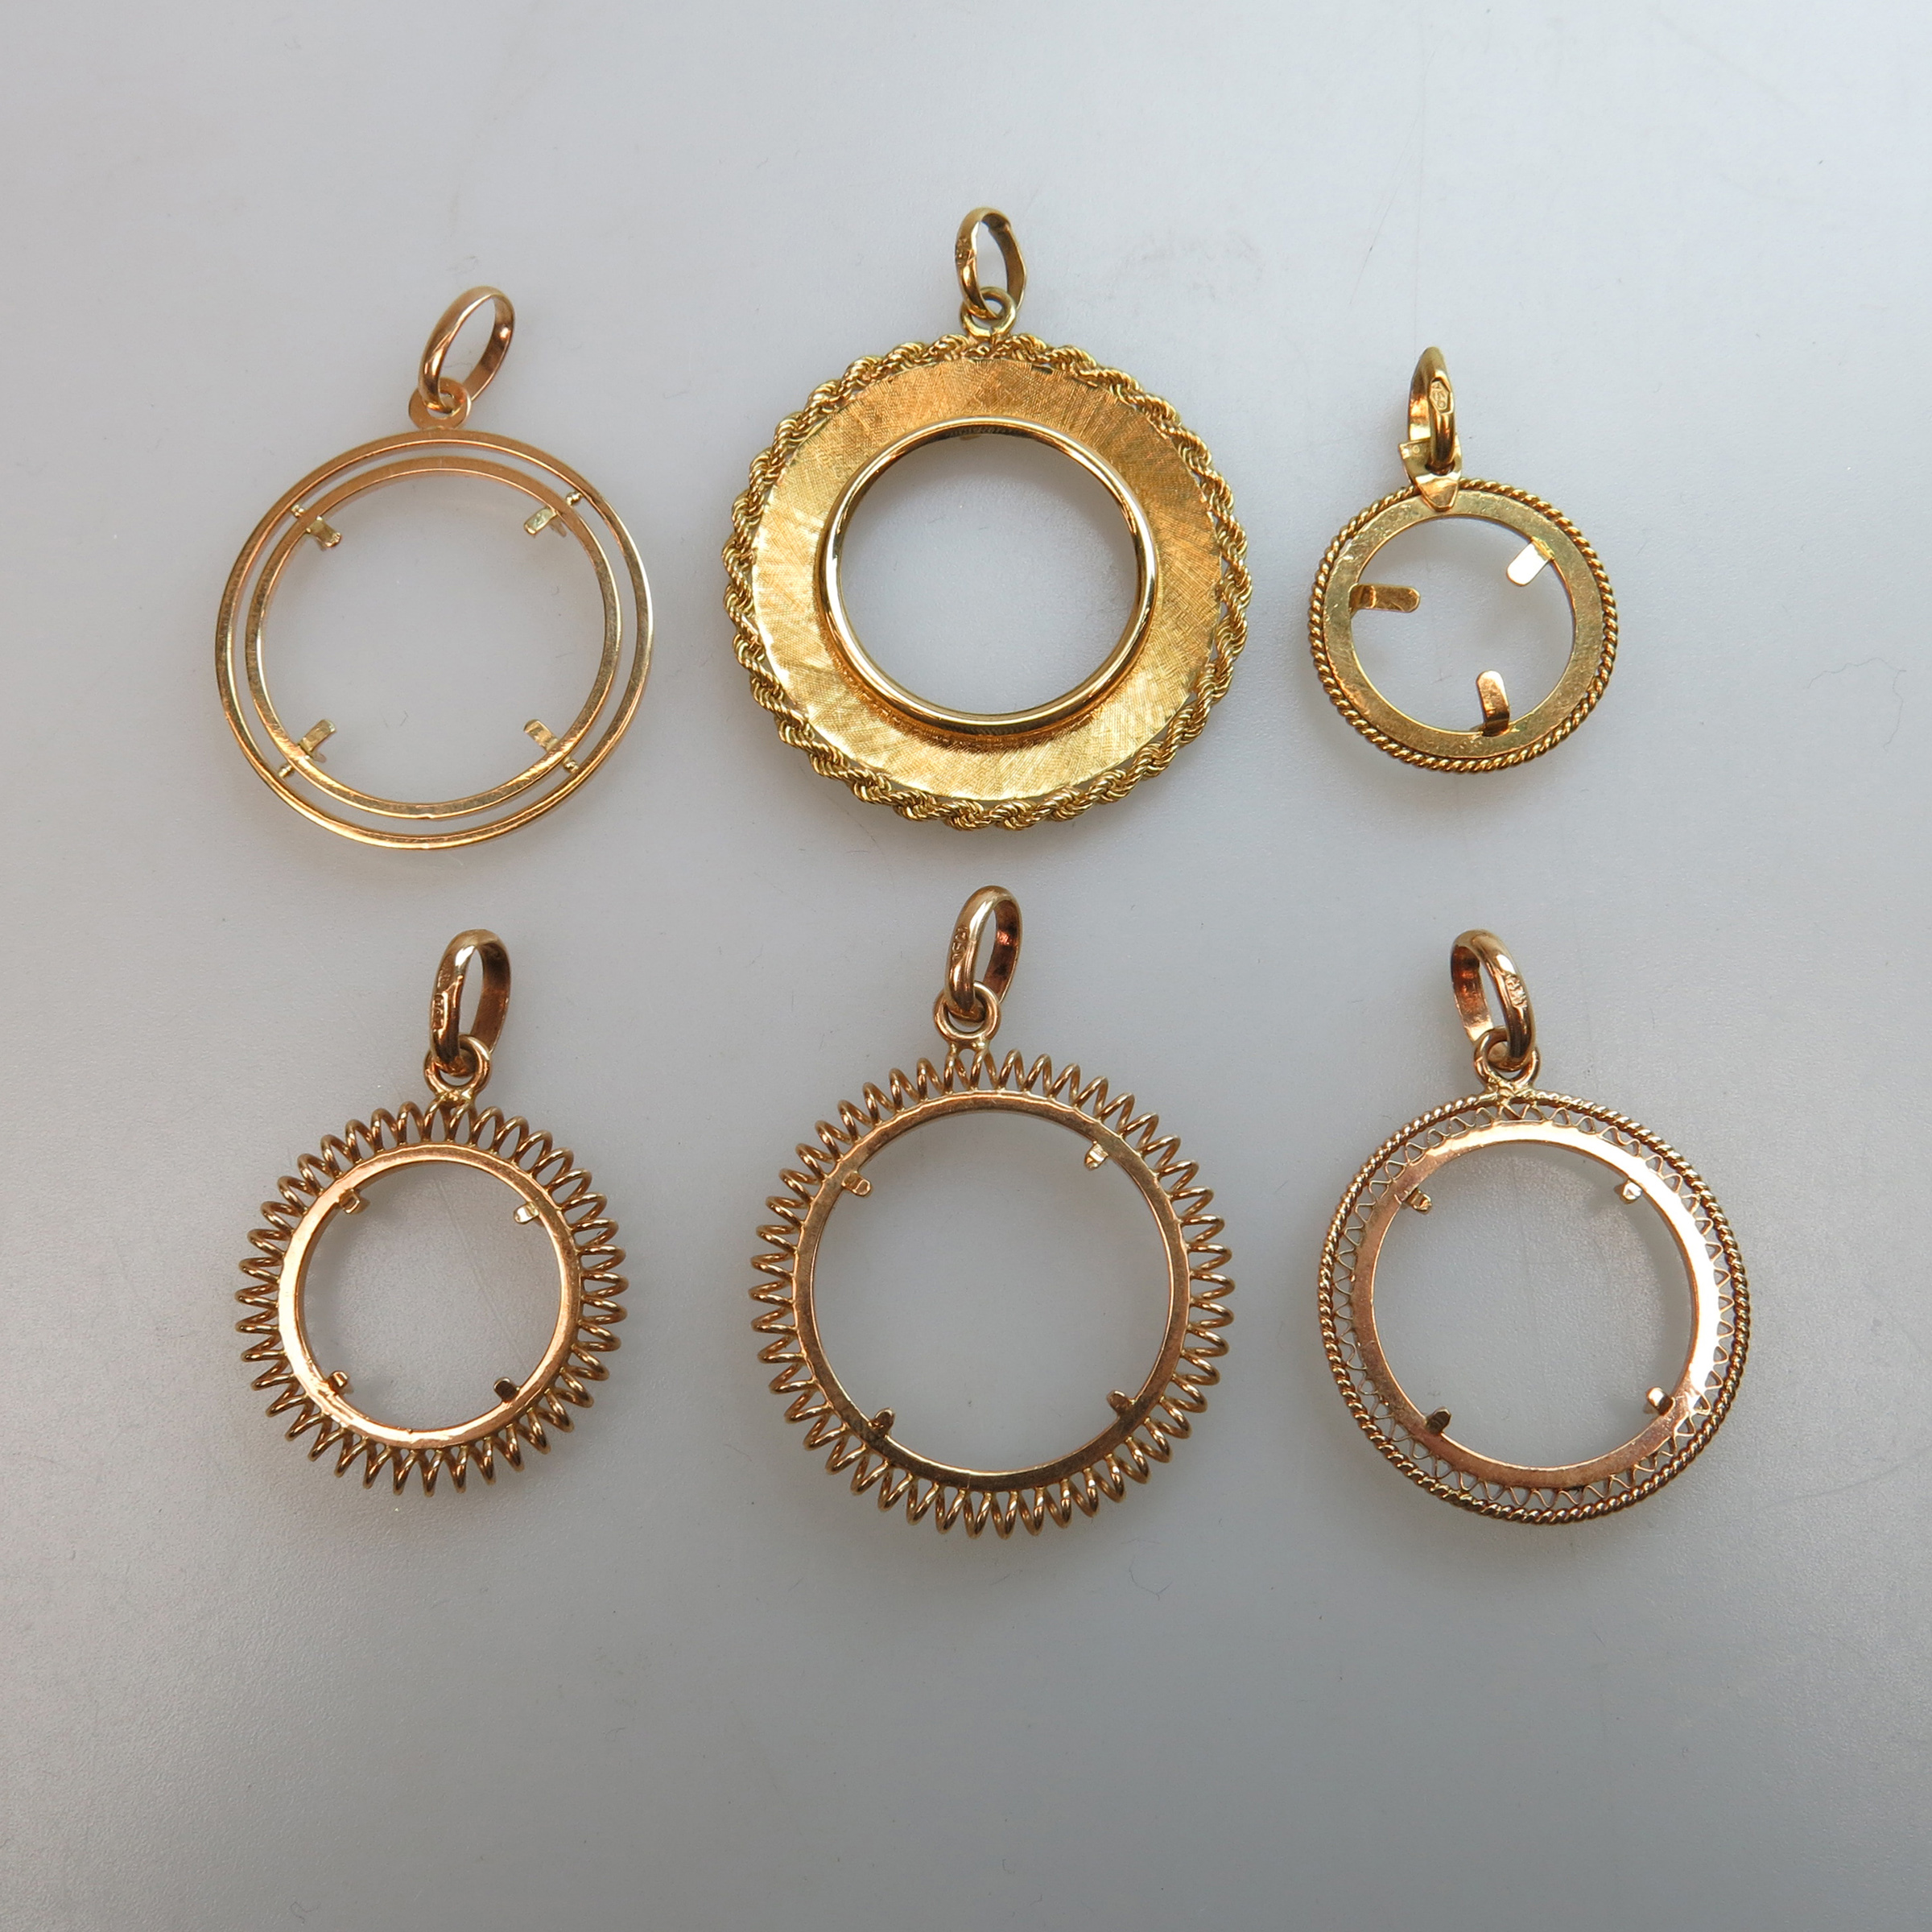 6 x 18k Yellow Gold Assorted Coin Frames